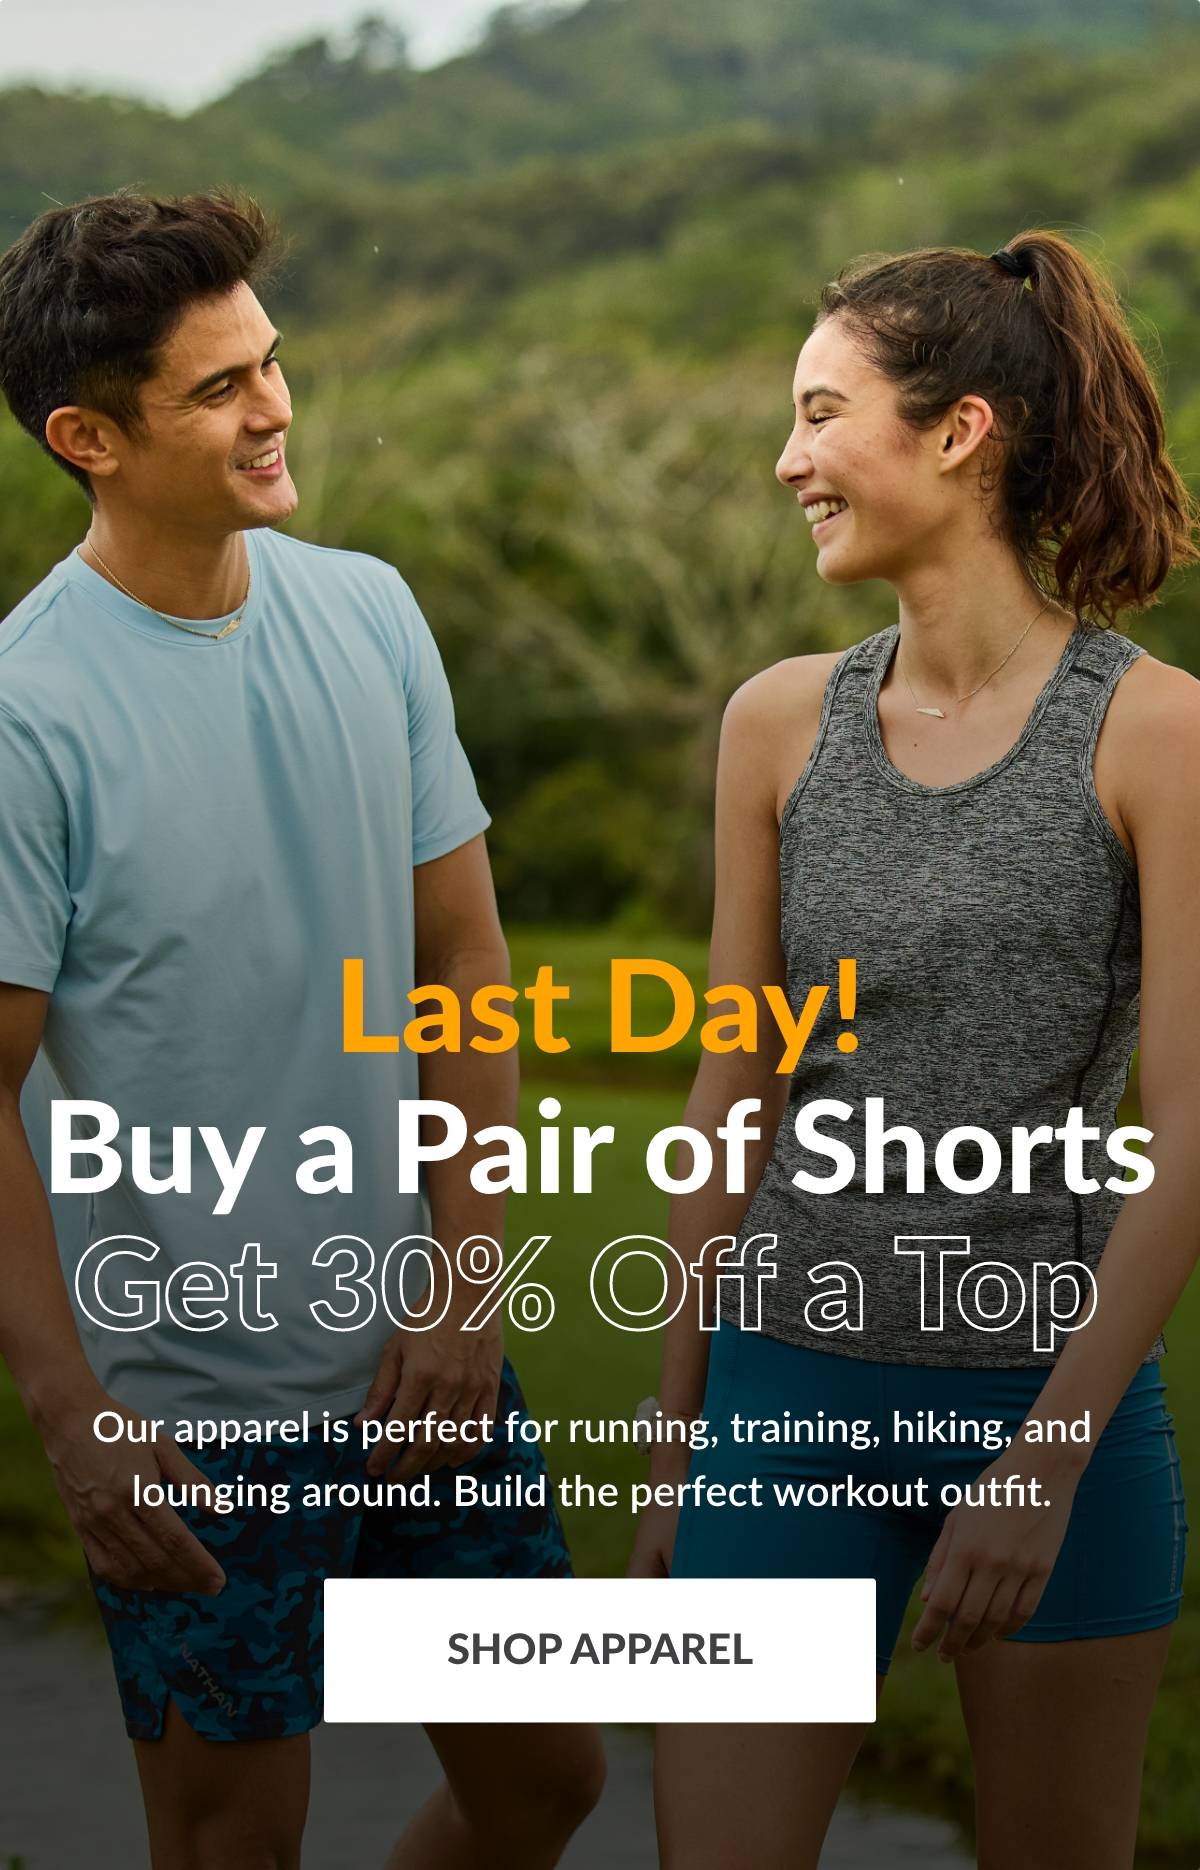 Last Day! Buy a Pair of Shorts, Get 30% off a Top. Our apparel is perfect for running, training, hiking, and lounging around. Build the perfect workout outfit. SHOP APPAREL